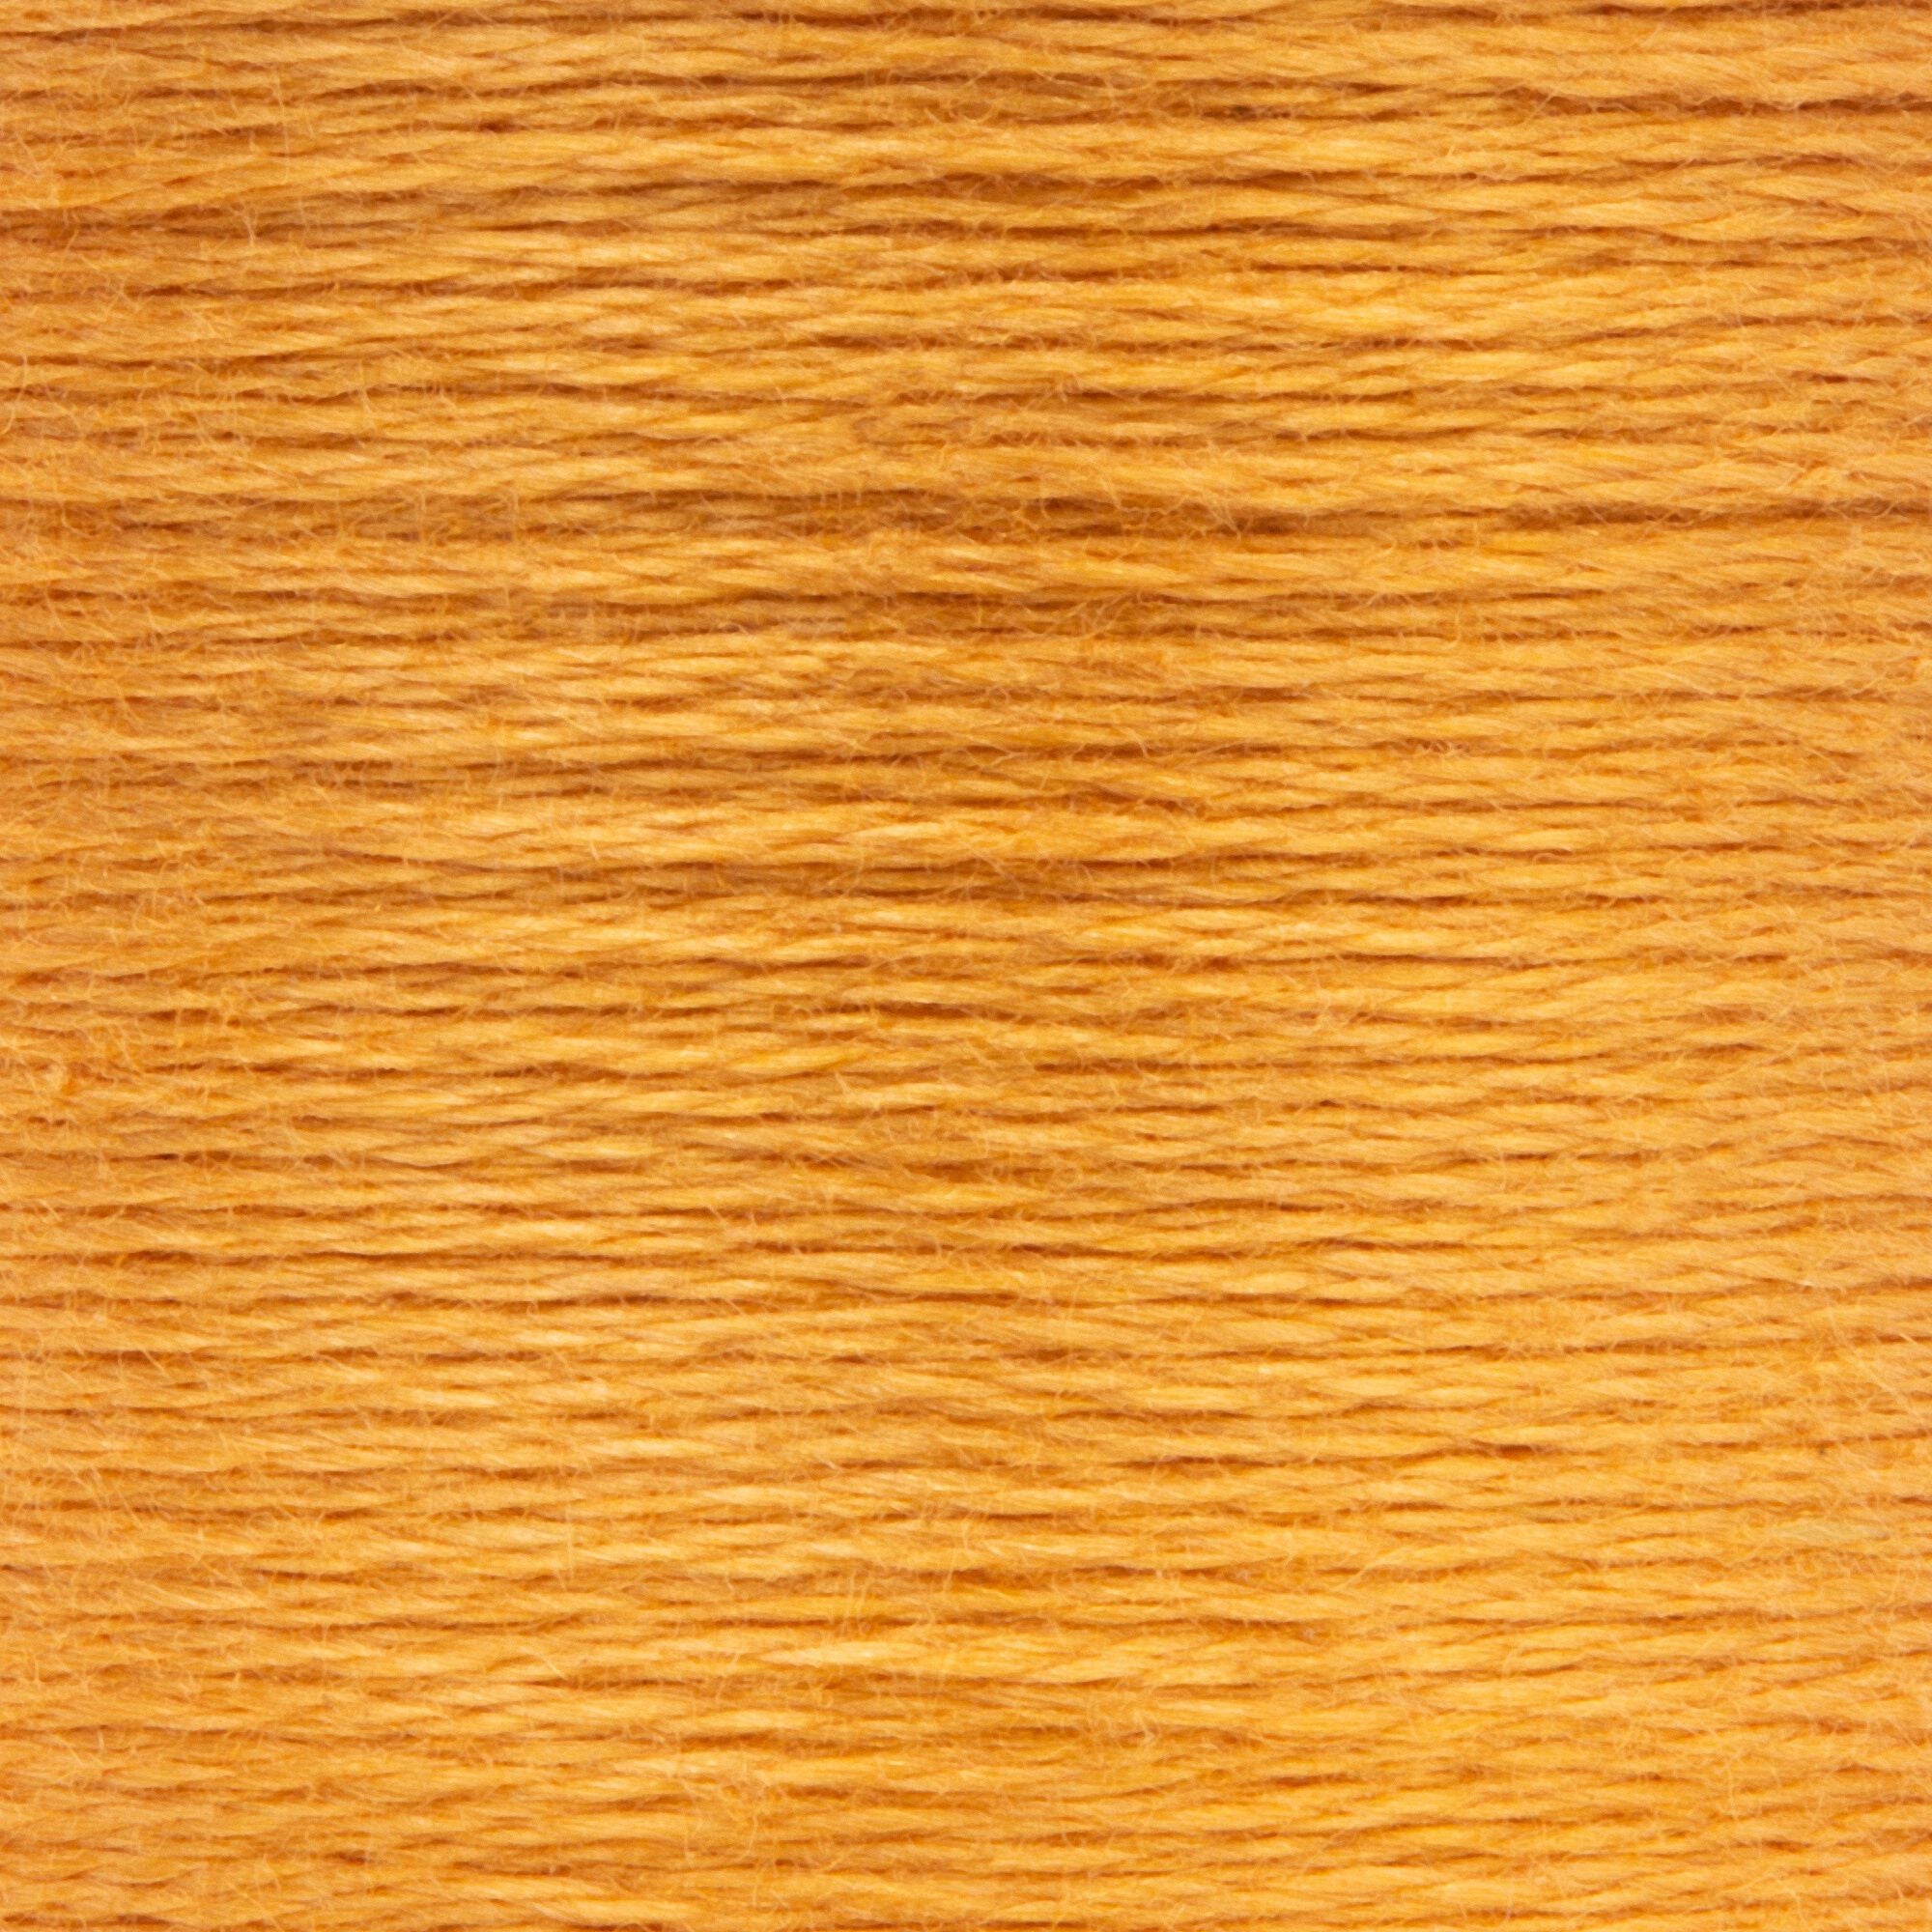 Anchor Embroidery Floss in Nutmeg Med